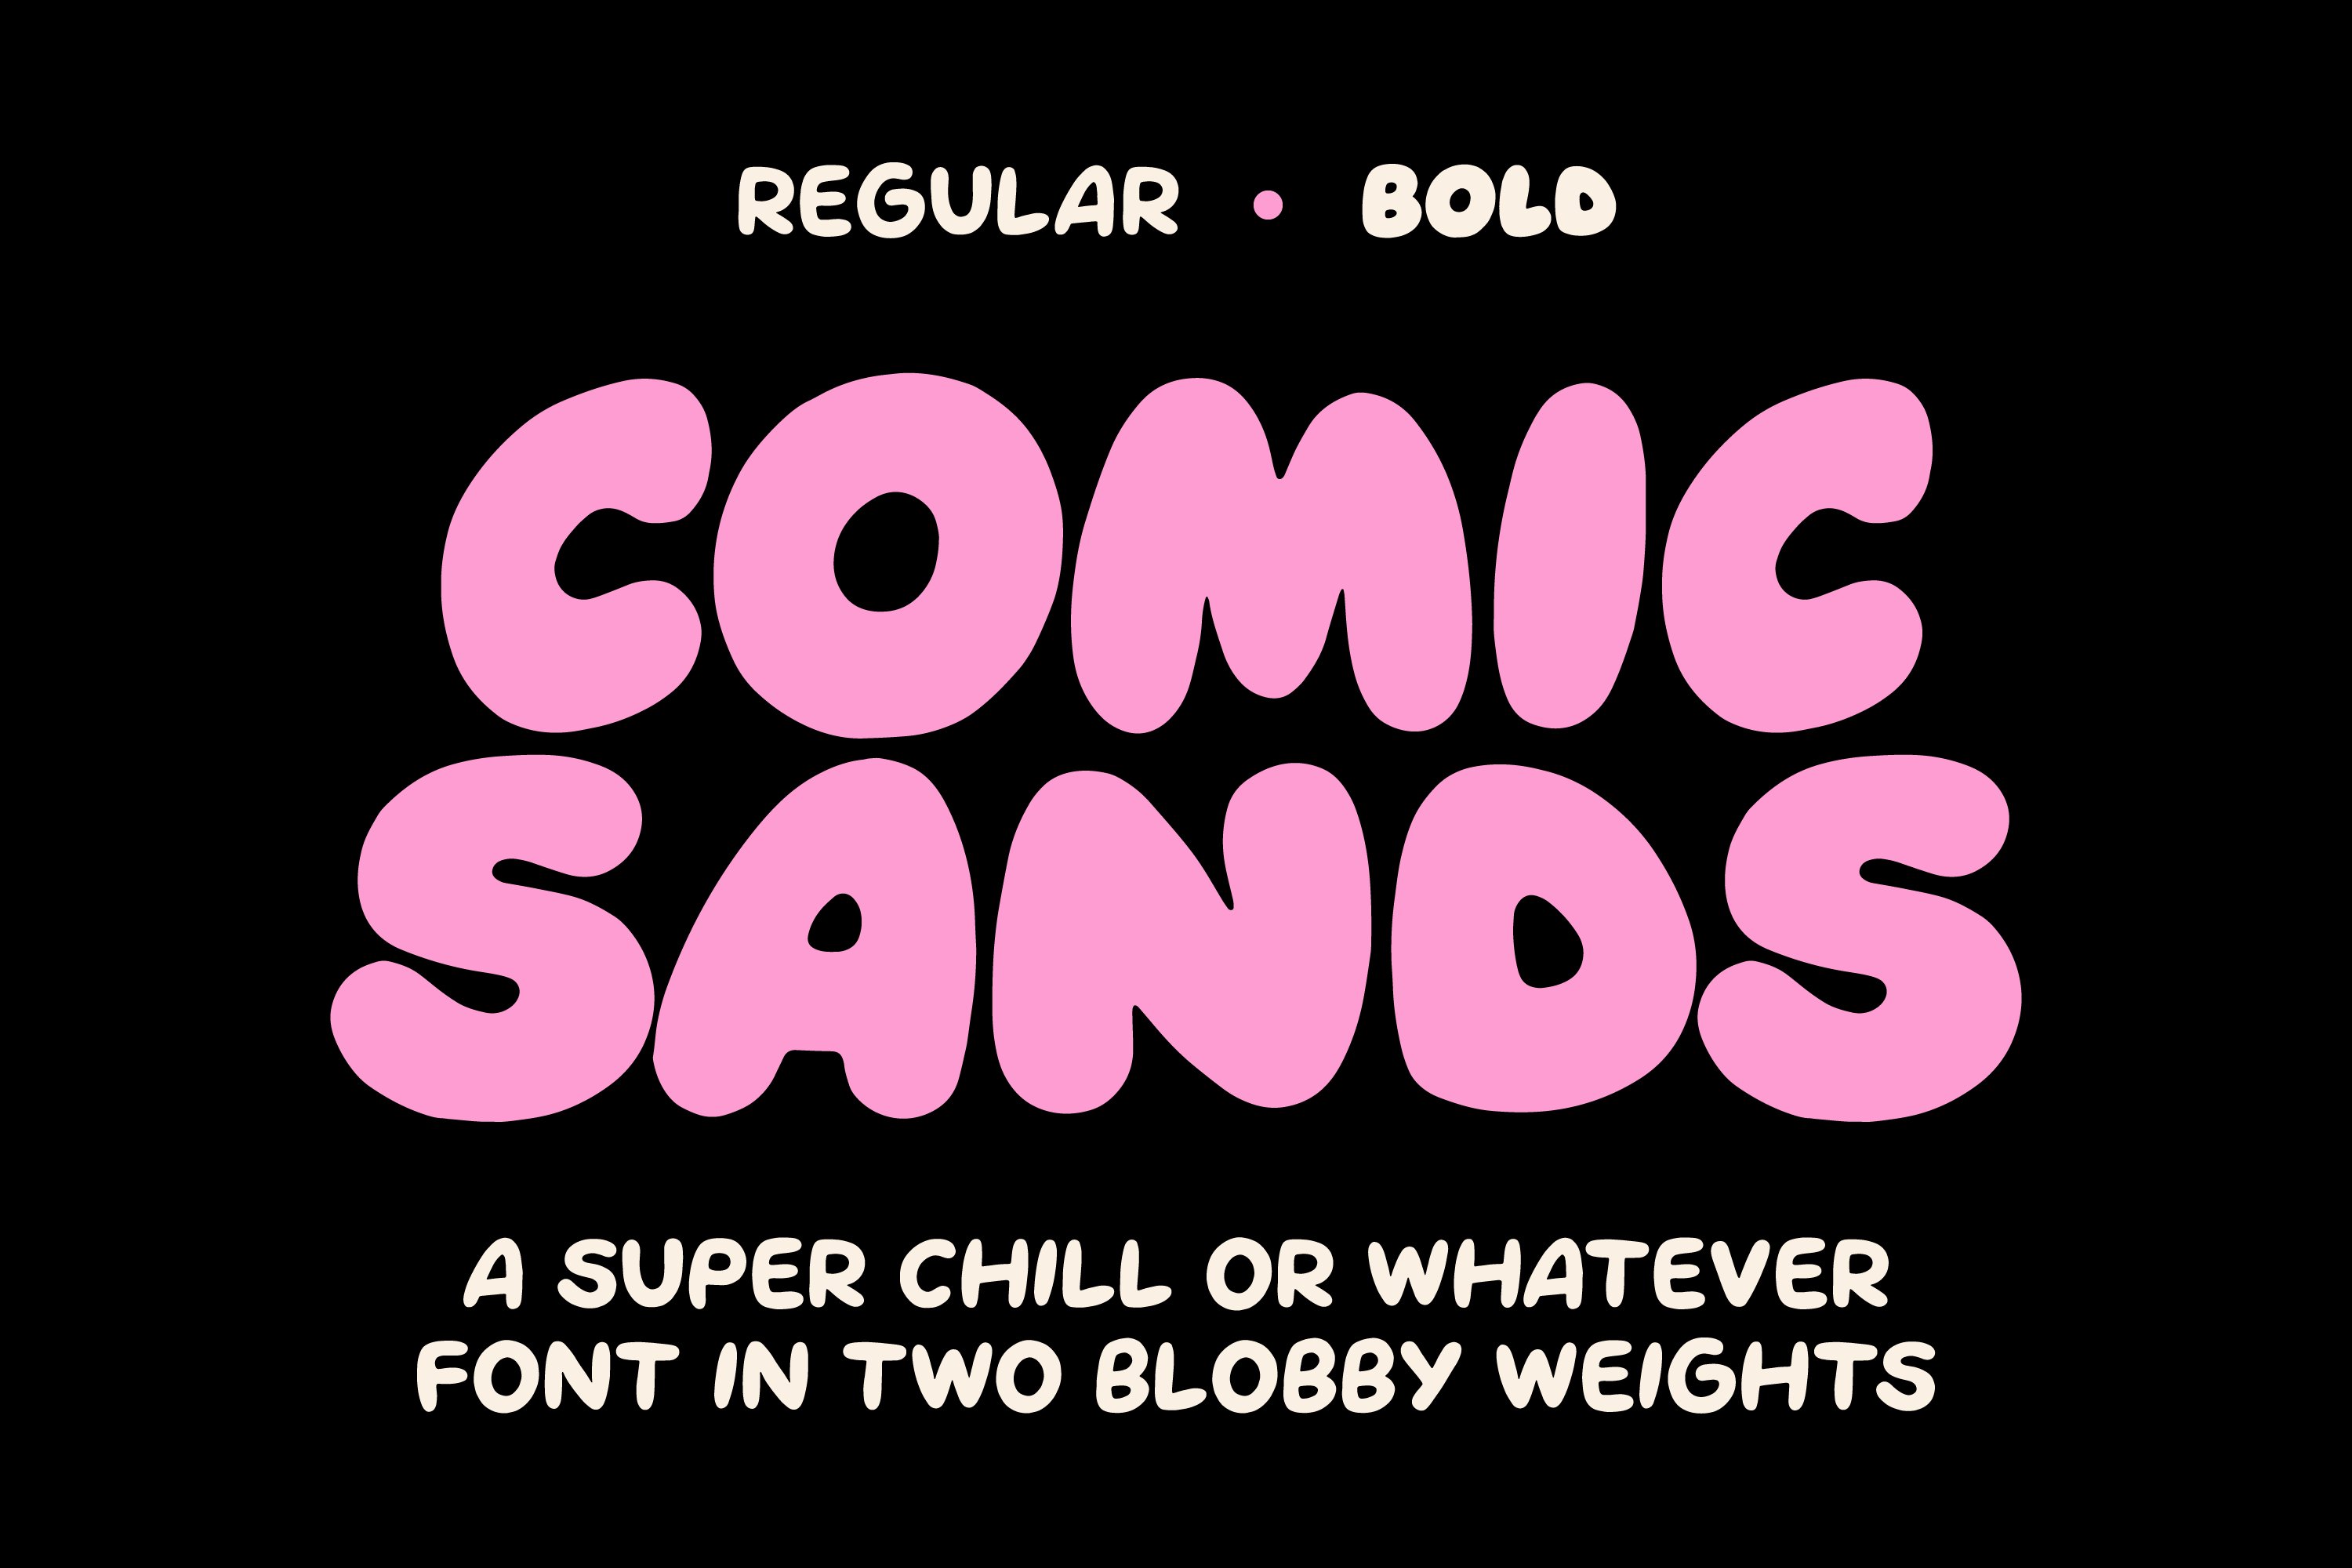 Comic Sands! A Font For Good Times cover image.